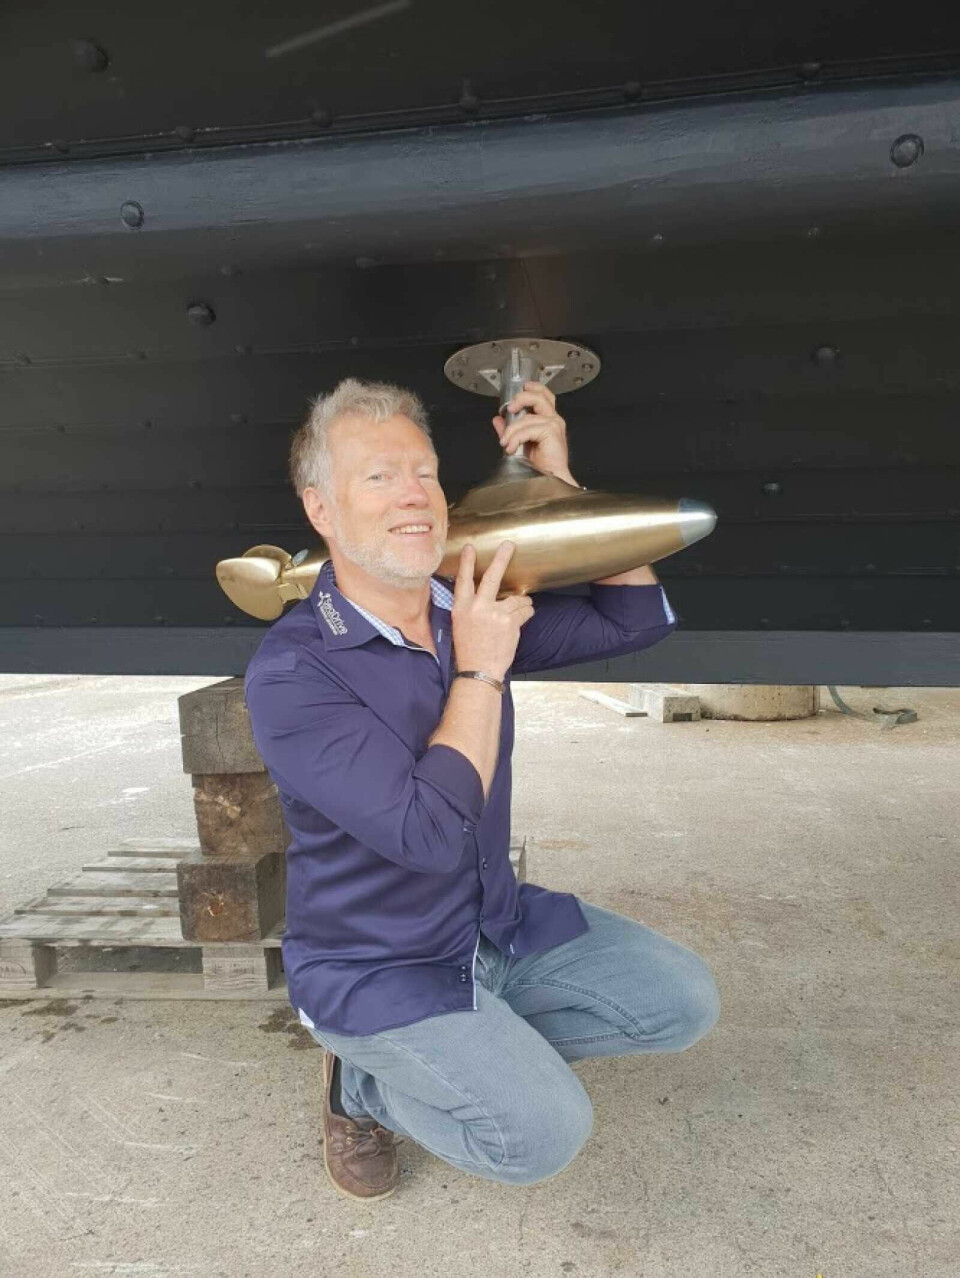 For innovator and SeaDrive part-owner Finn Limseth, working with the Viking ship has been a useful experience.